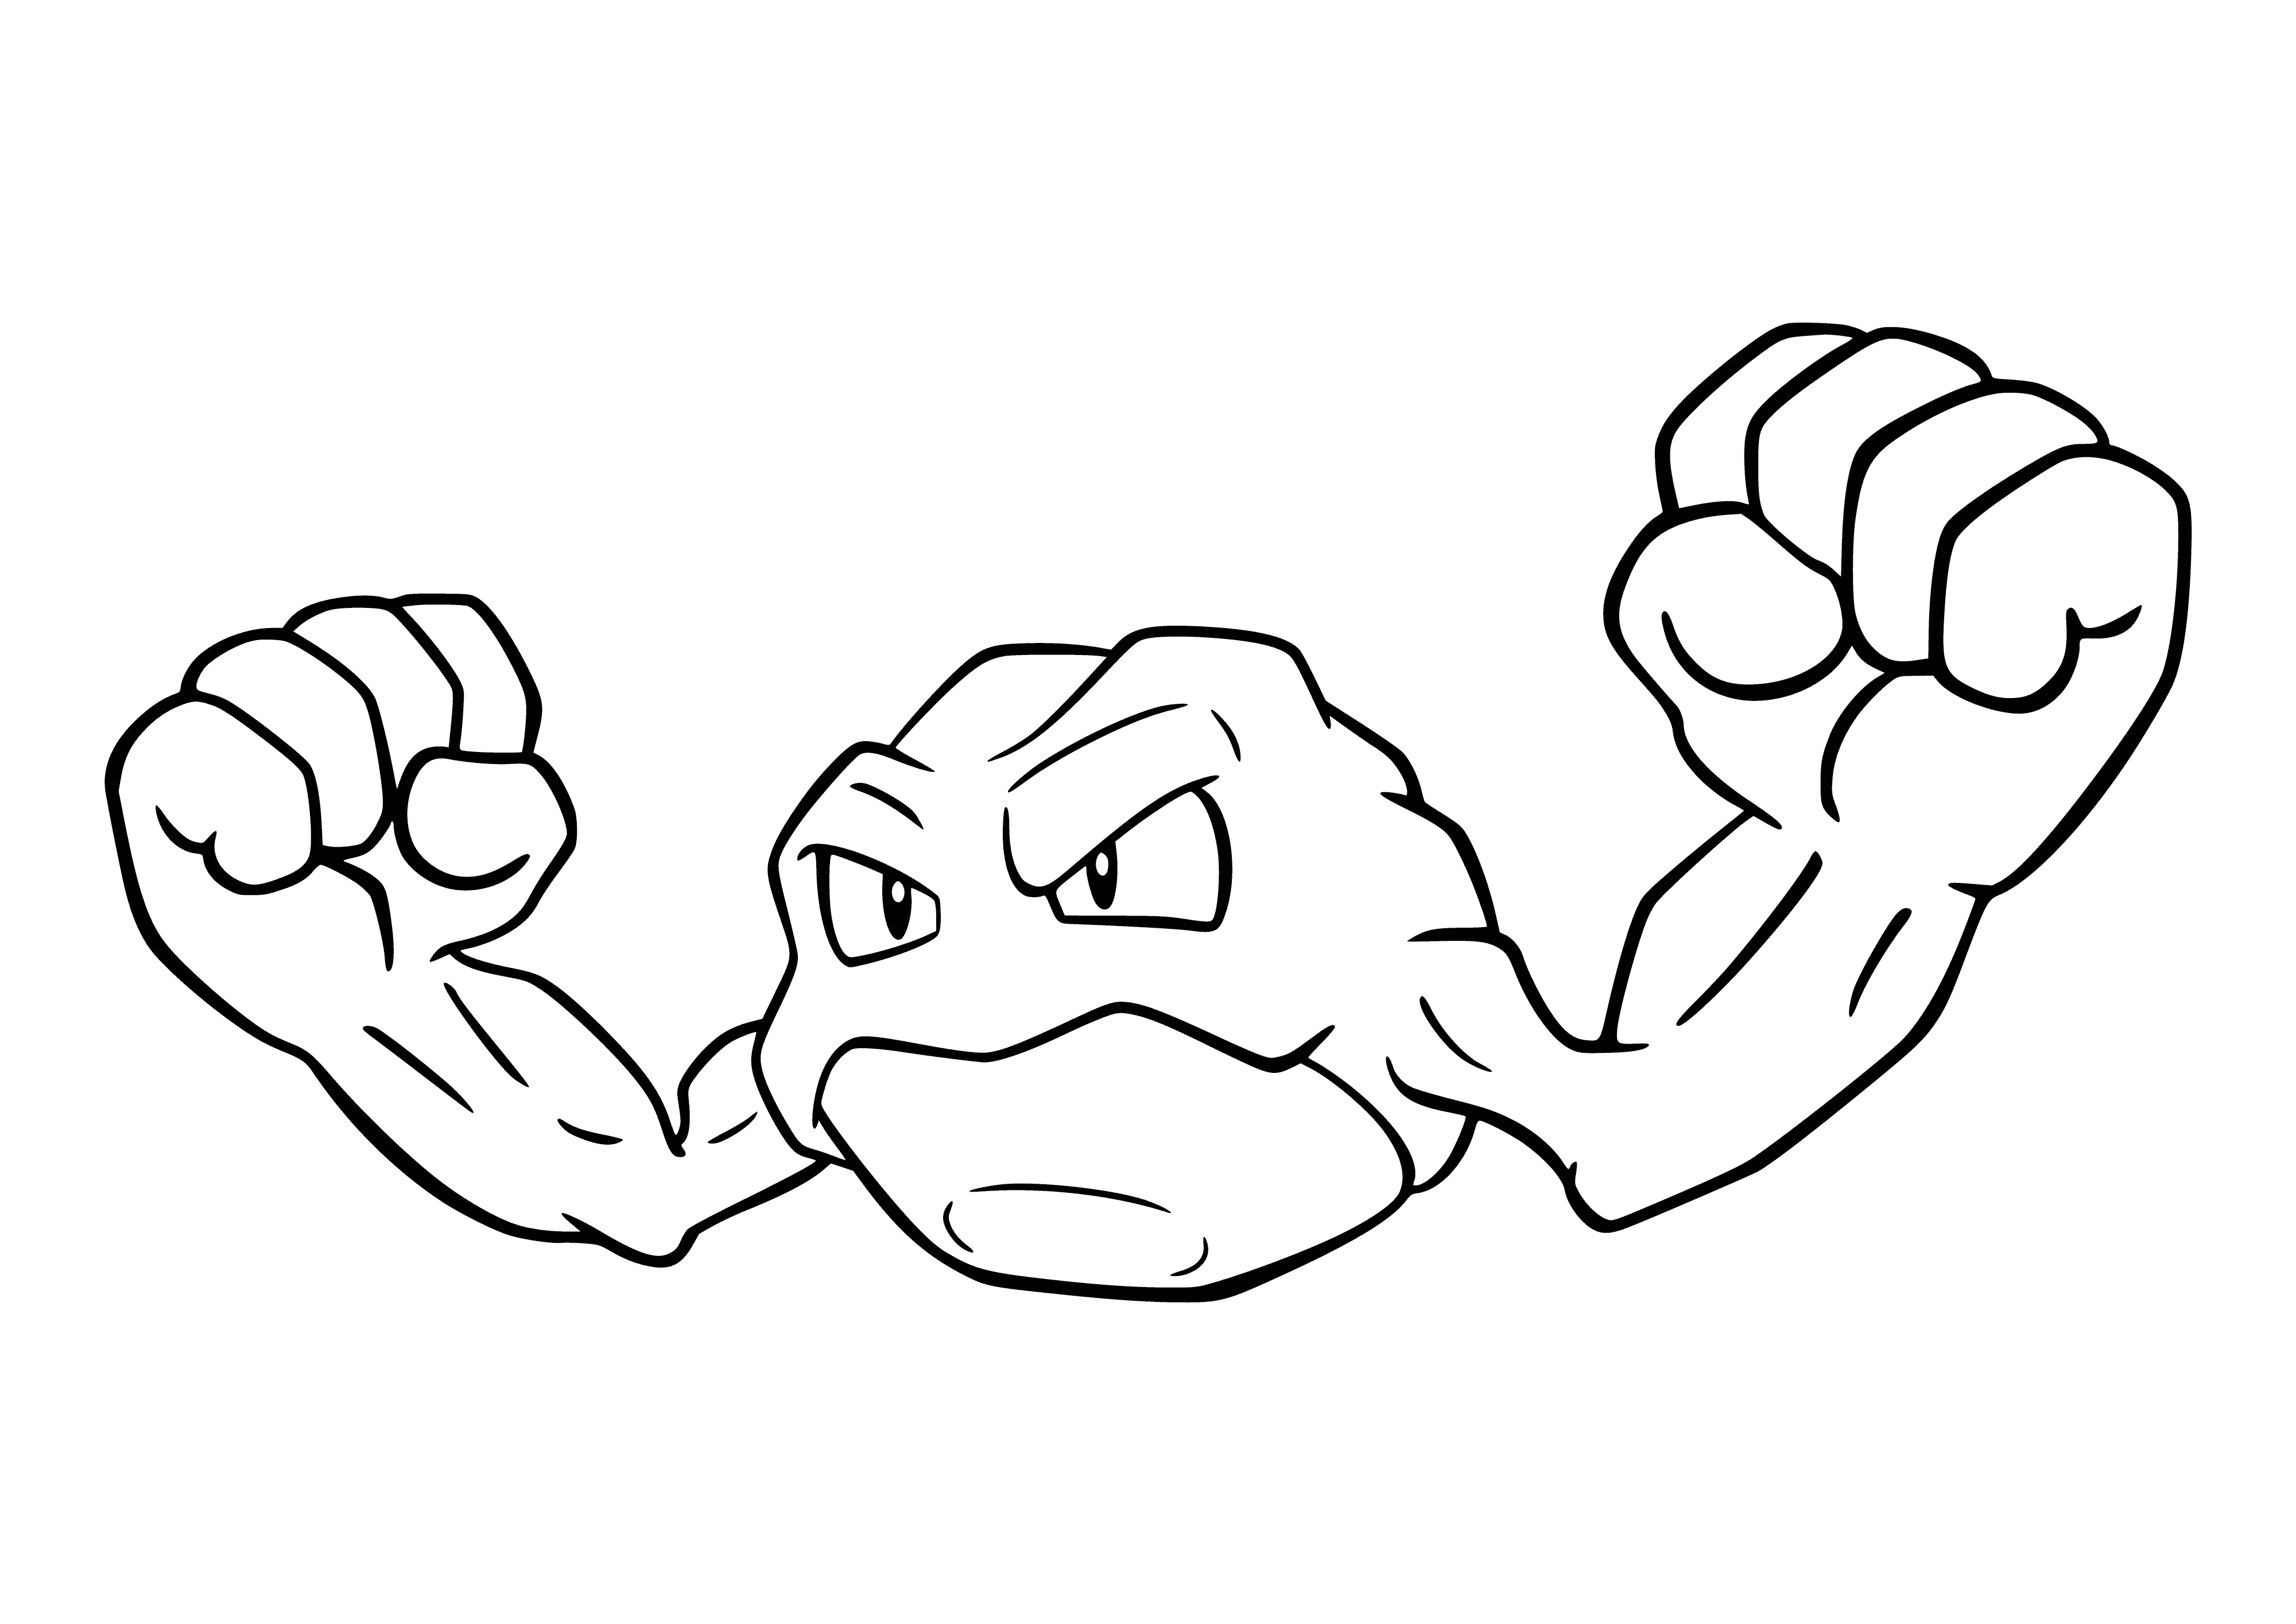 coloring page: Small, brown Pokemon looks like a rock: 2 arms, 2 legs, black eyes, black line on its back.